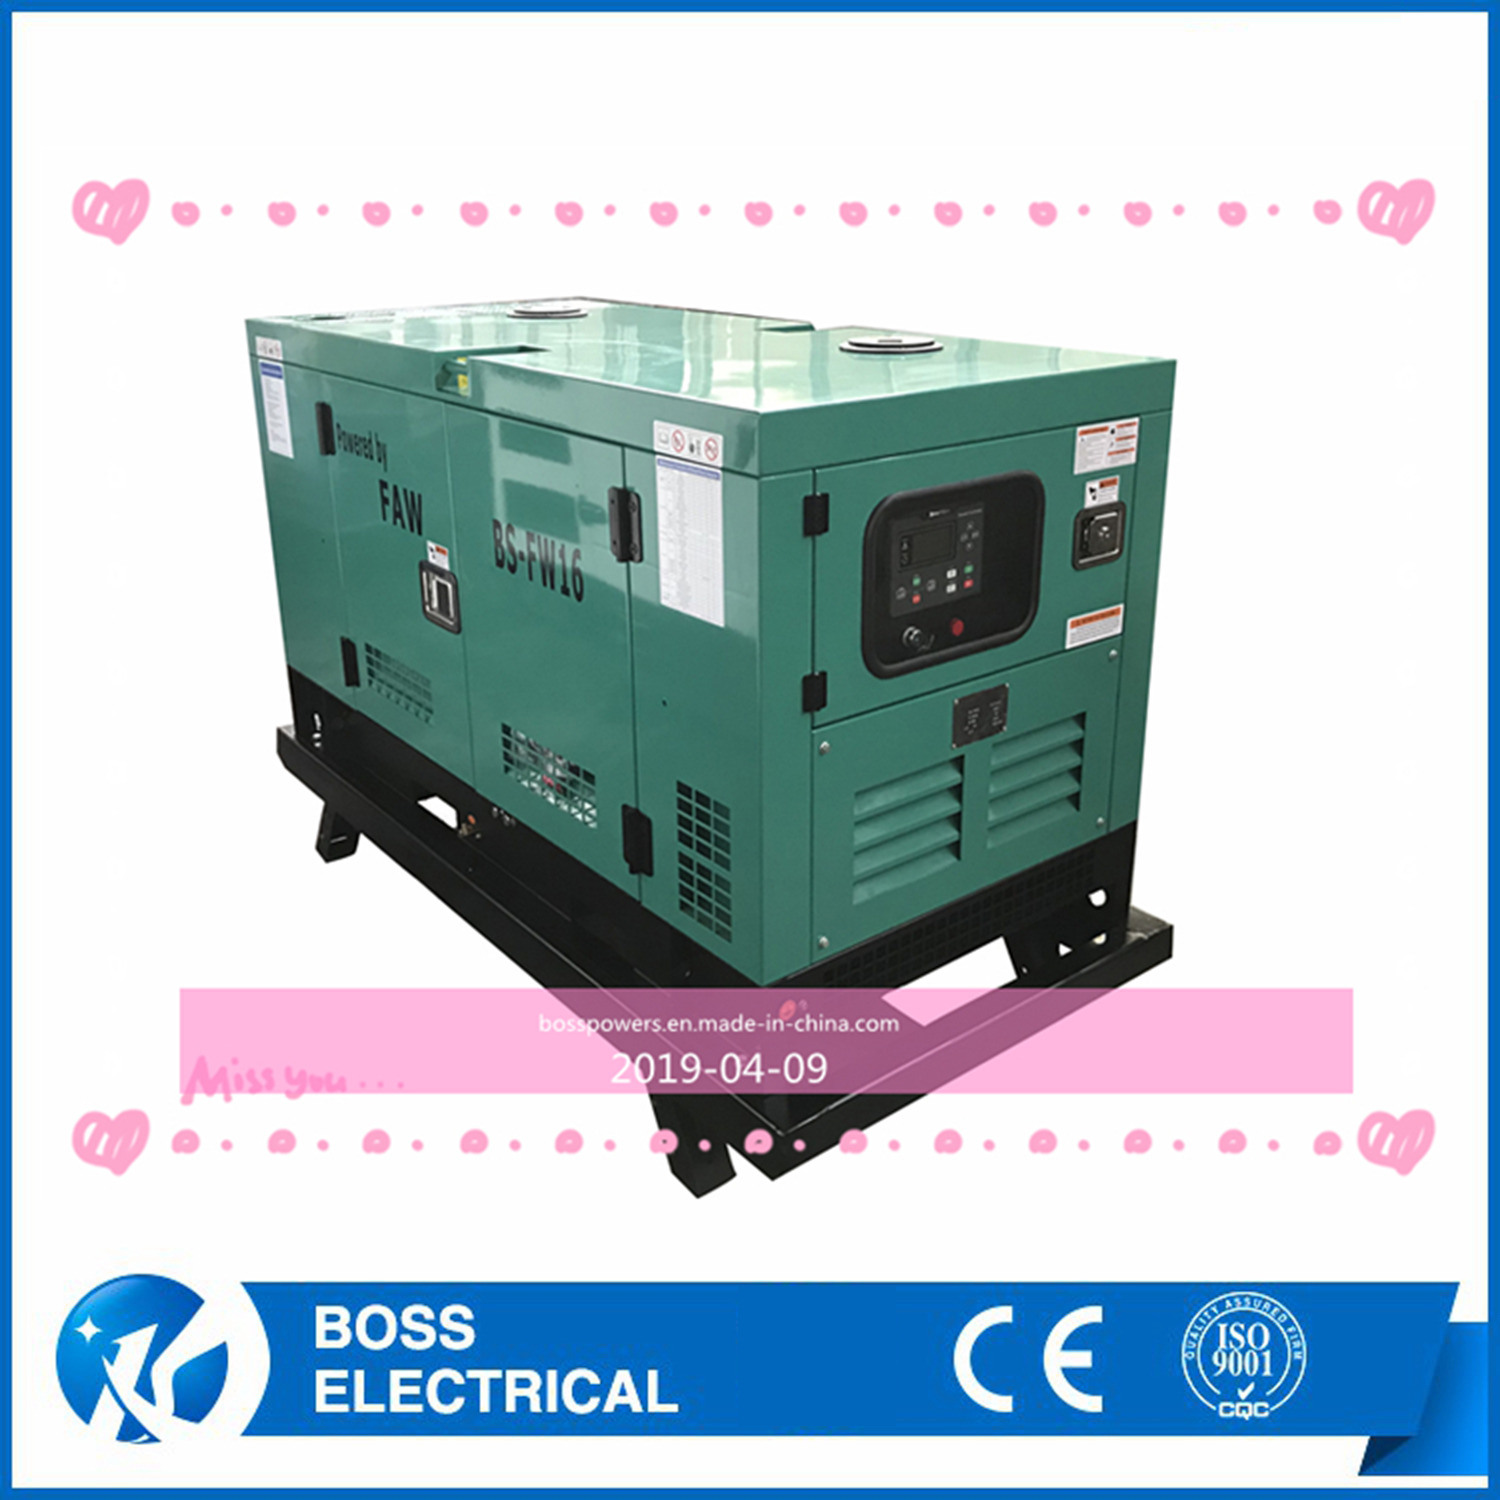 Brand New Electricity 20kVA to 2000kVA Low Noise Diesel Engine Dynamo Rainproof/Soundproof Canopy Box Price Super Silent Generators with CE/ISO